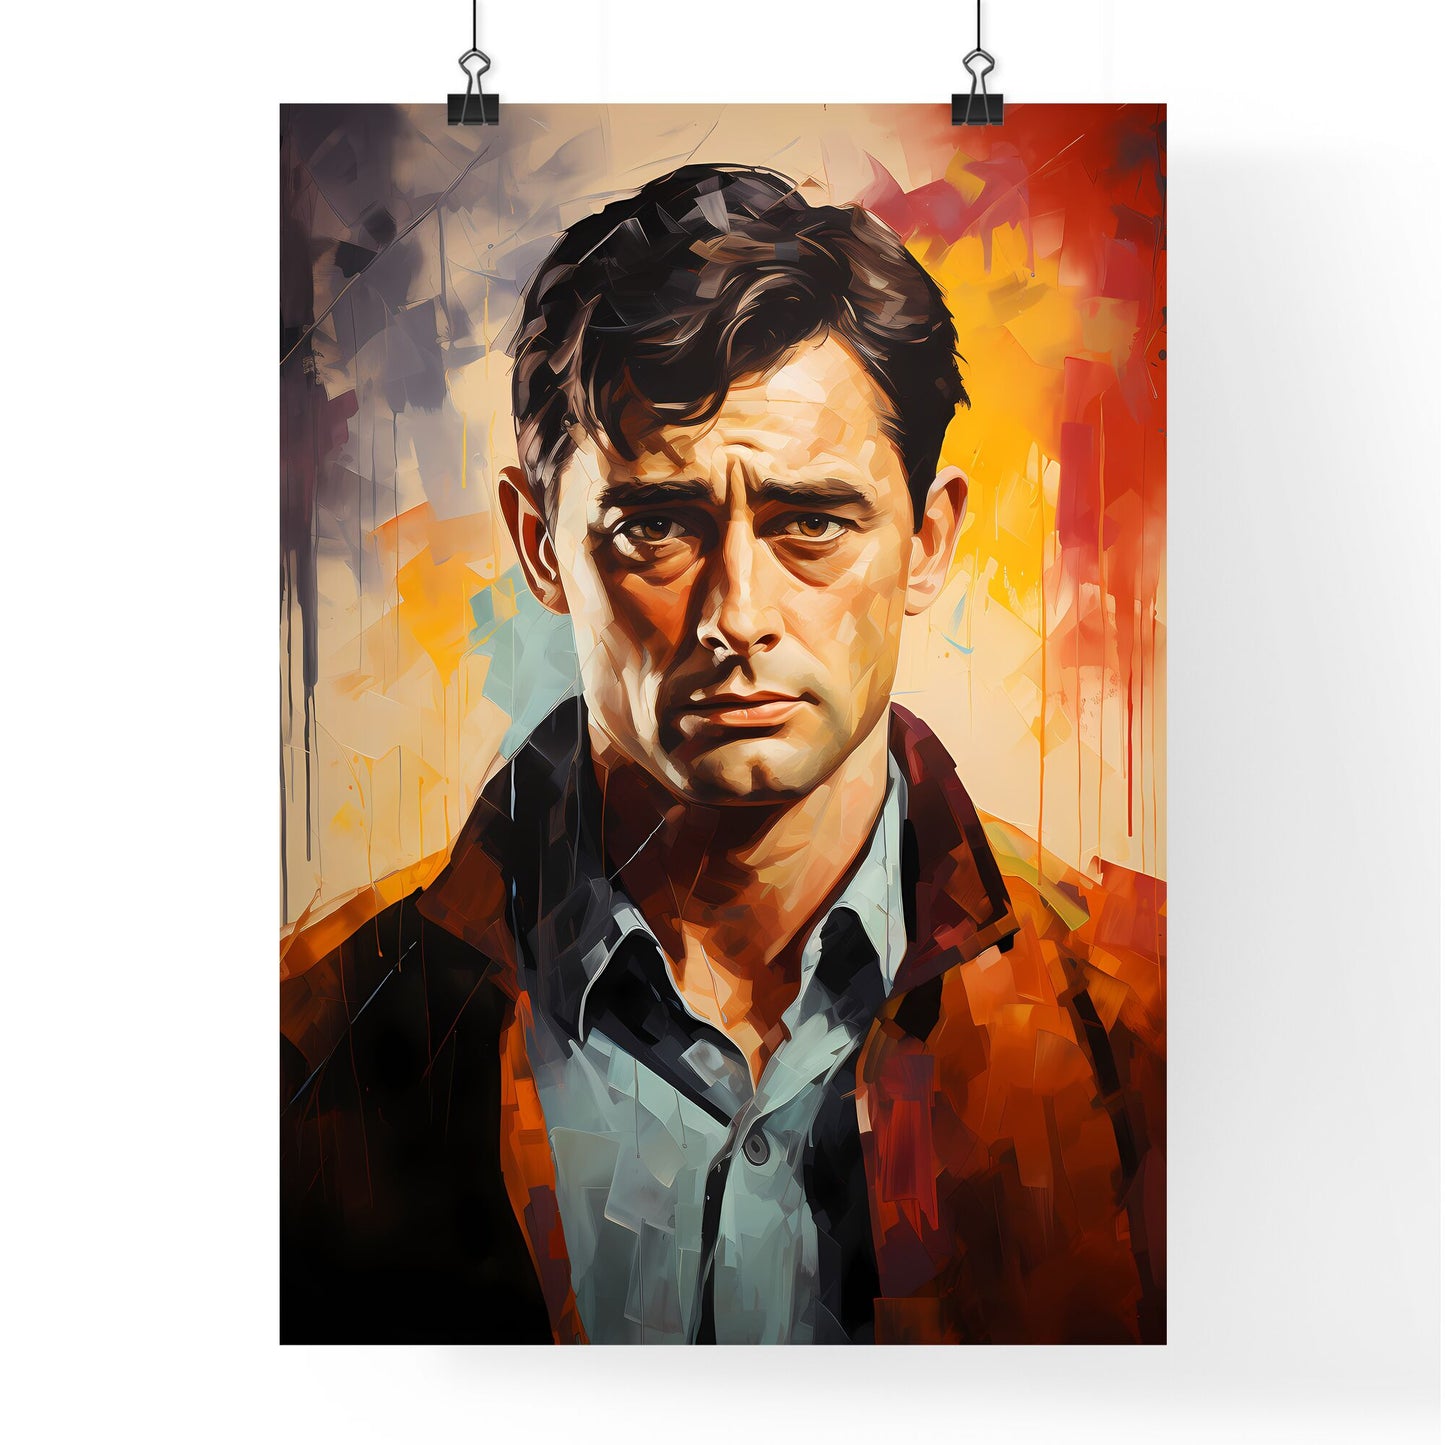 Atticus Finch Gregory Peck - A Painting Of A Man Default Title